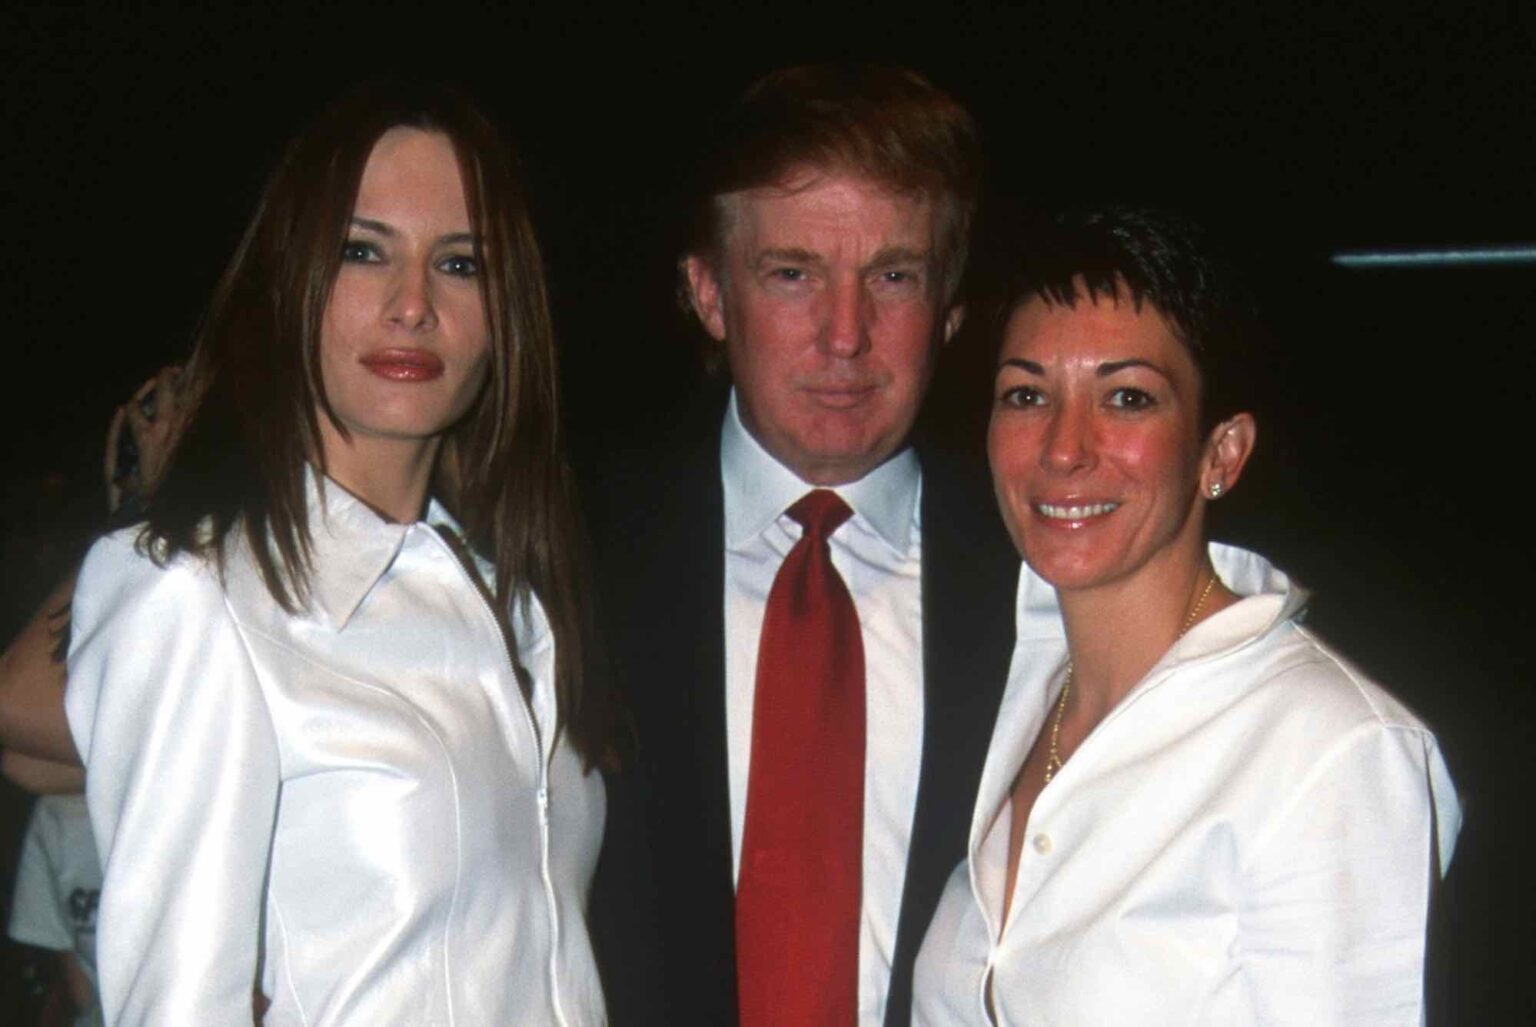 How many names can Ghislaine Maxwell name? Discover how many celebrities Maxwell took photos with and if they're connected to Epstein.